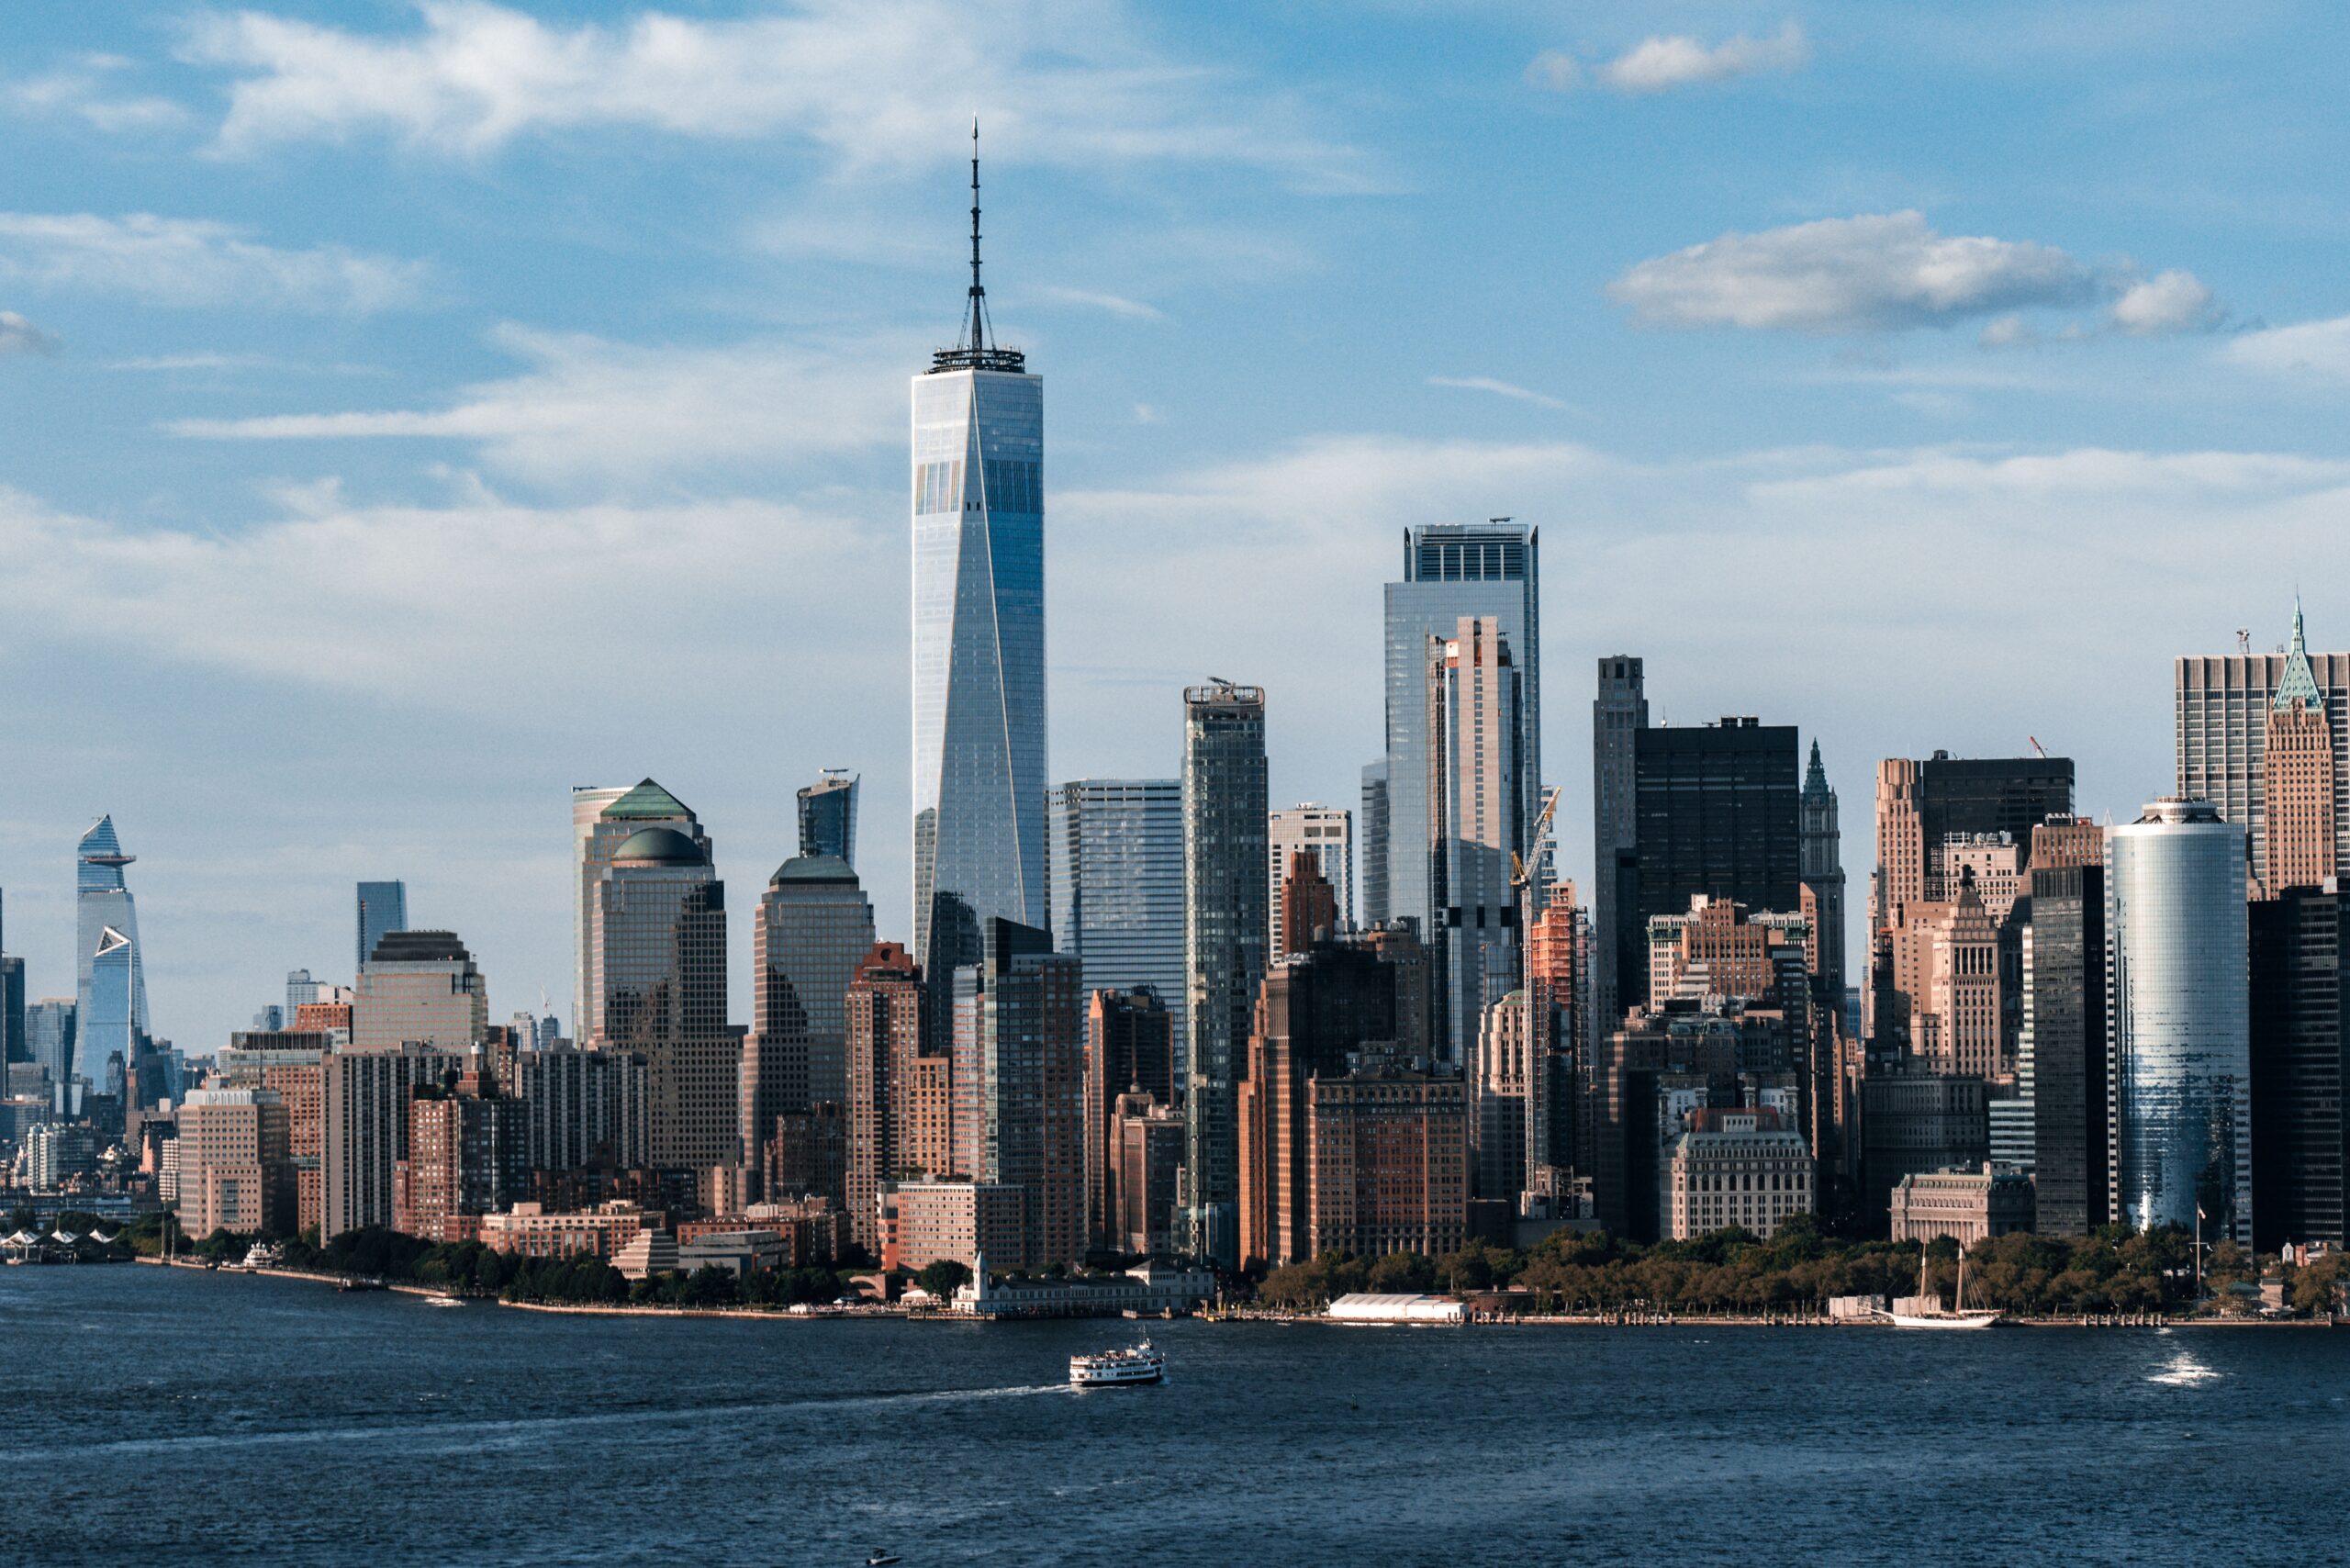 The state of New York gets the No.1 spot as the 'Best State for LGBTQ+ Equality' based on a new annual report from Out Leadership. (Photo Credit: Jermaine Ee on Unsplash)